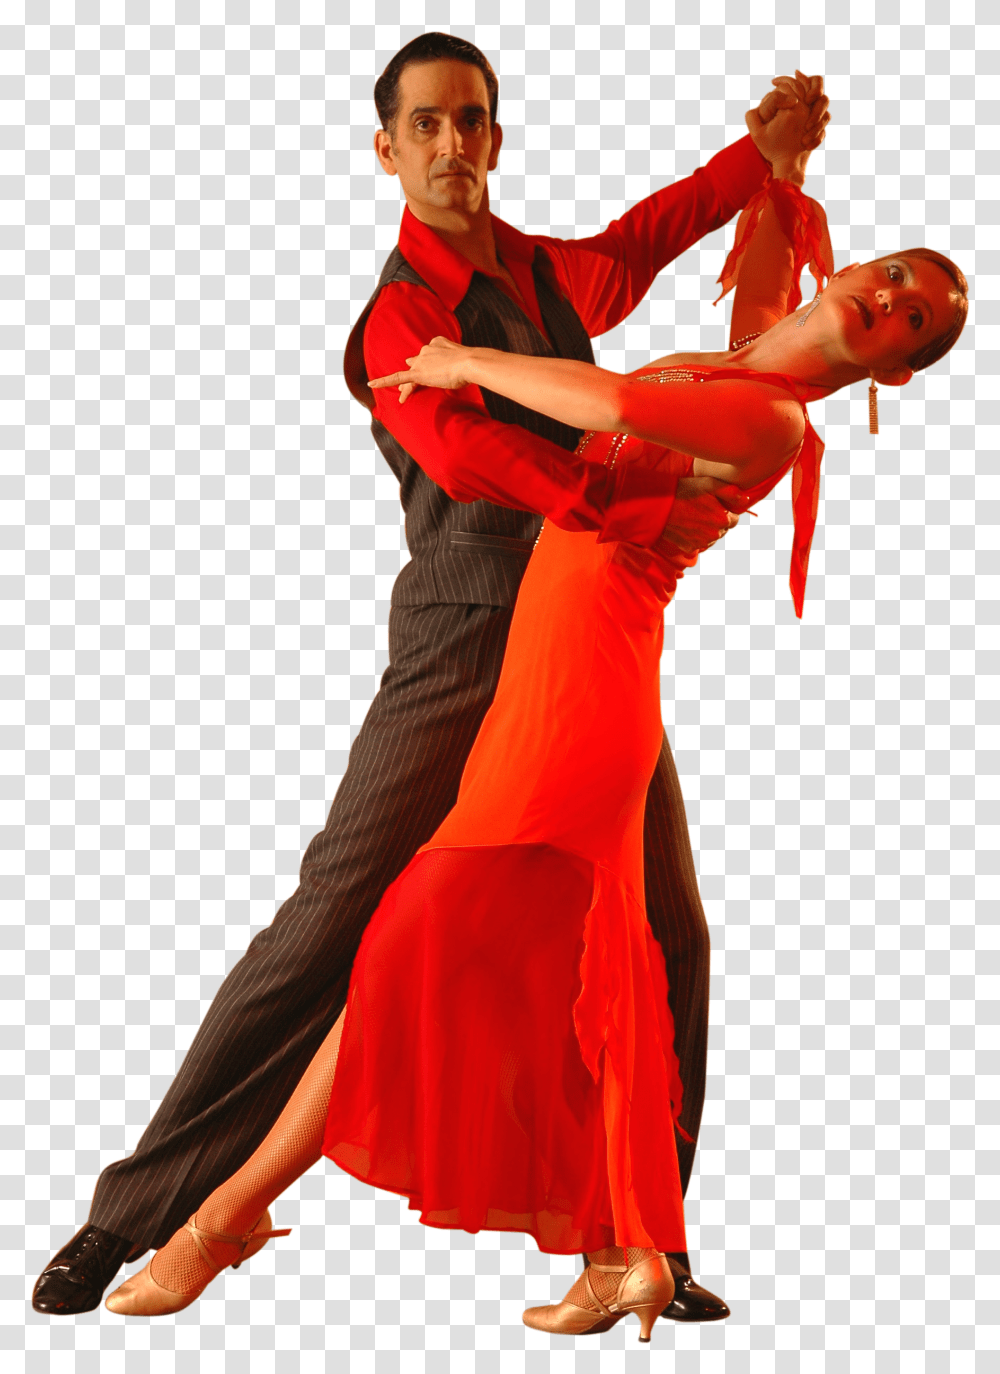 Dance Dancing Couple Arts Show People Pngs Dance Ballroom Dancing Couple, Dance Pose, Leisure Activities, Performer, Person Transparent Png